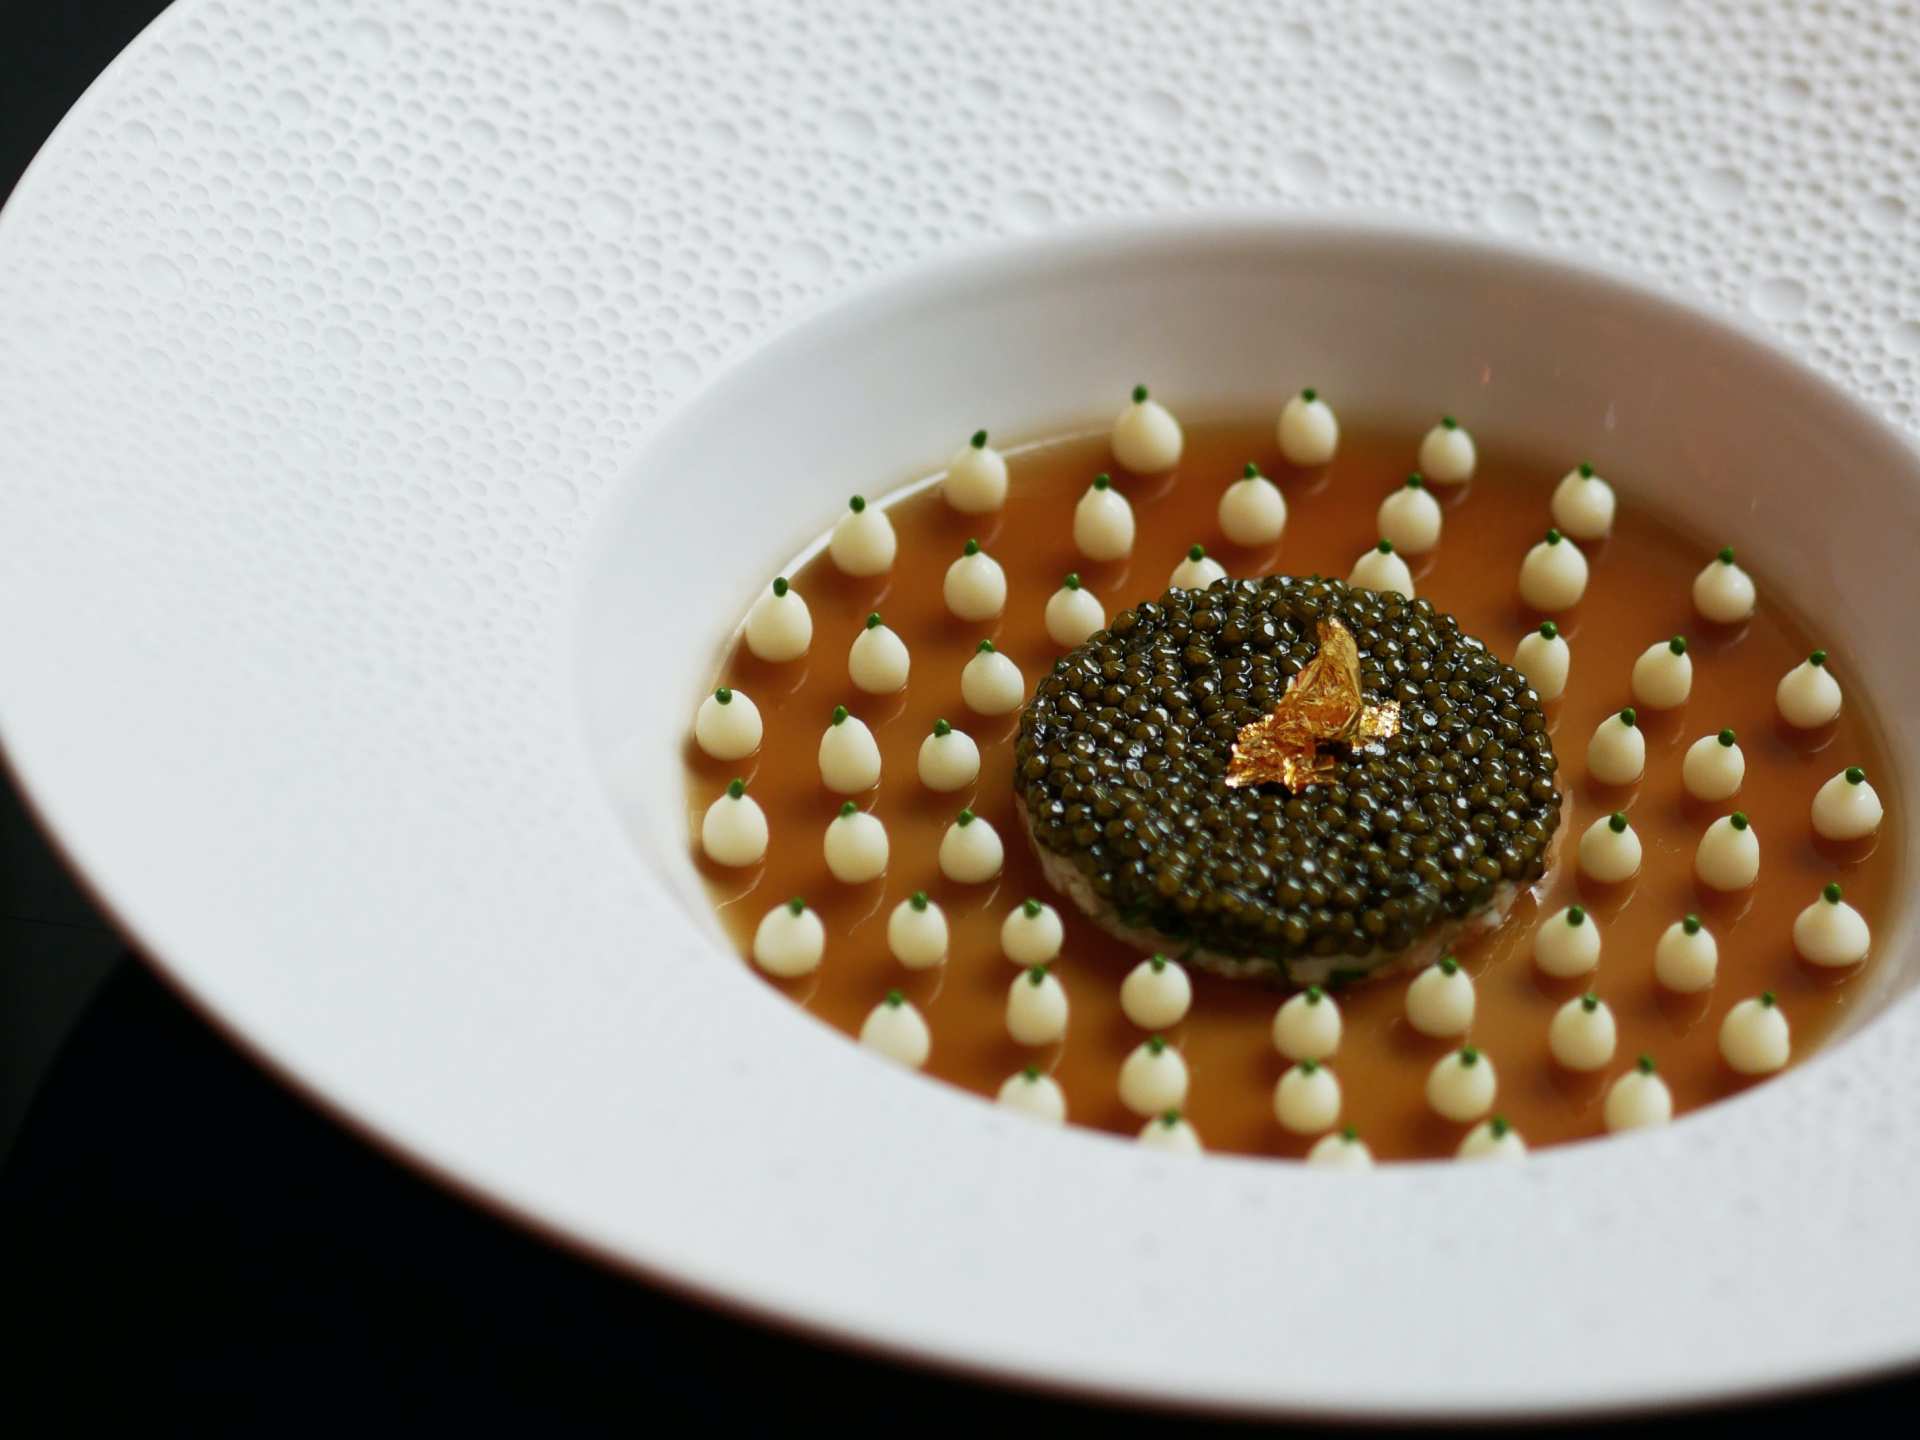 Caviar, king crab, lobster jelly and cauliflower purée